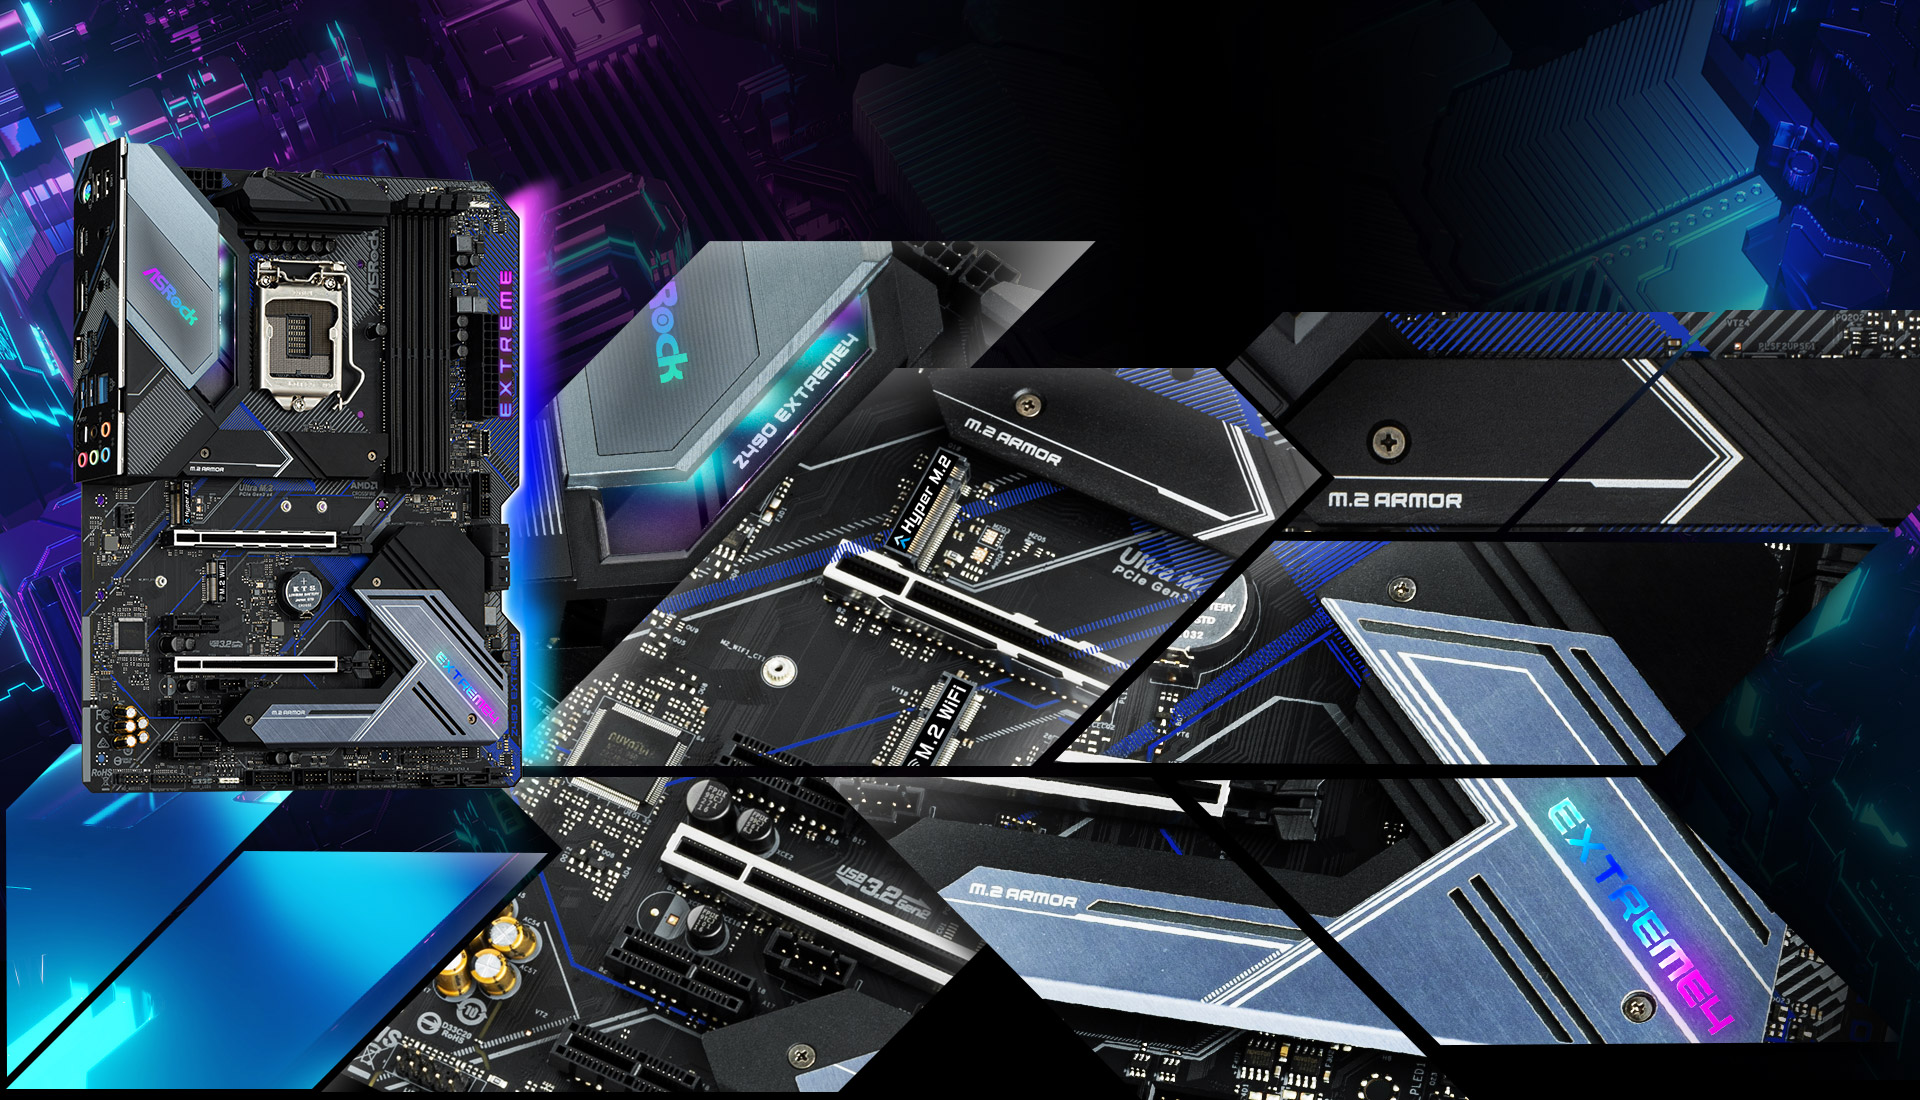 Z490 Extreme4 motherboard